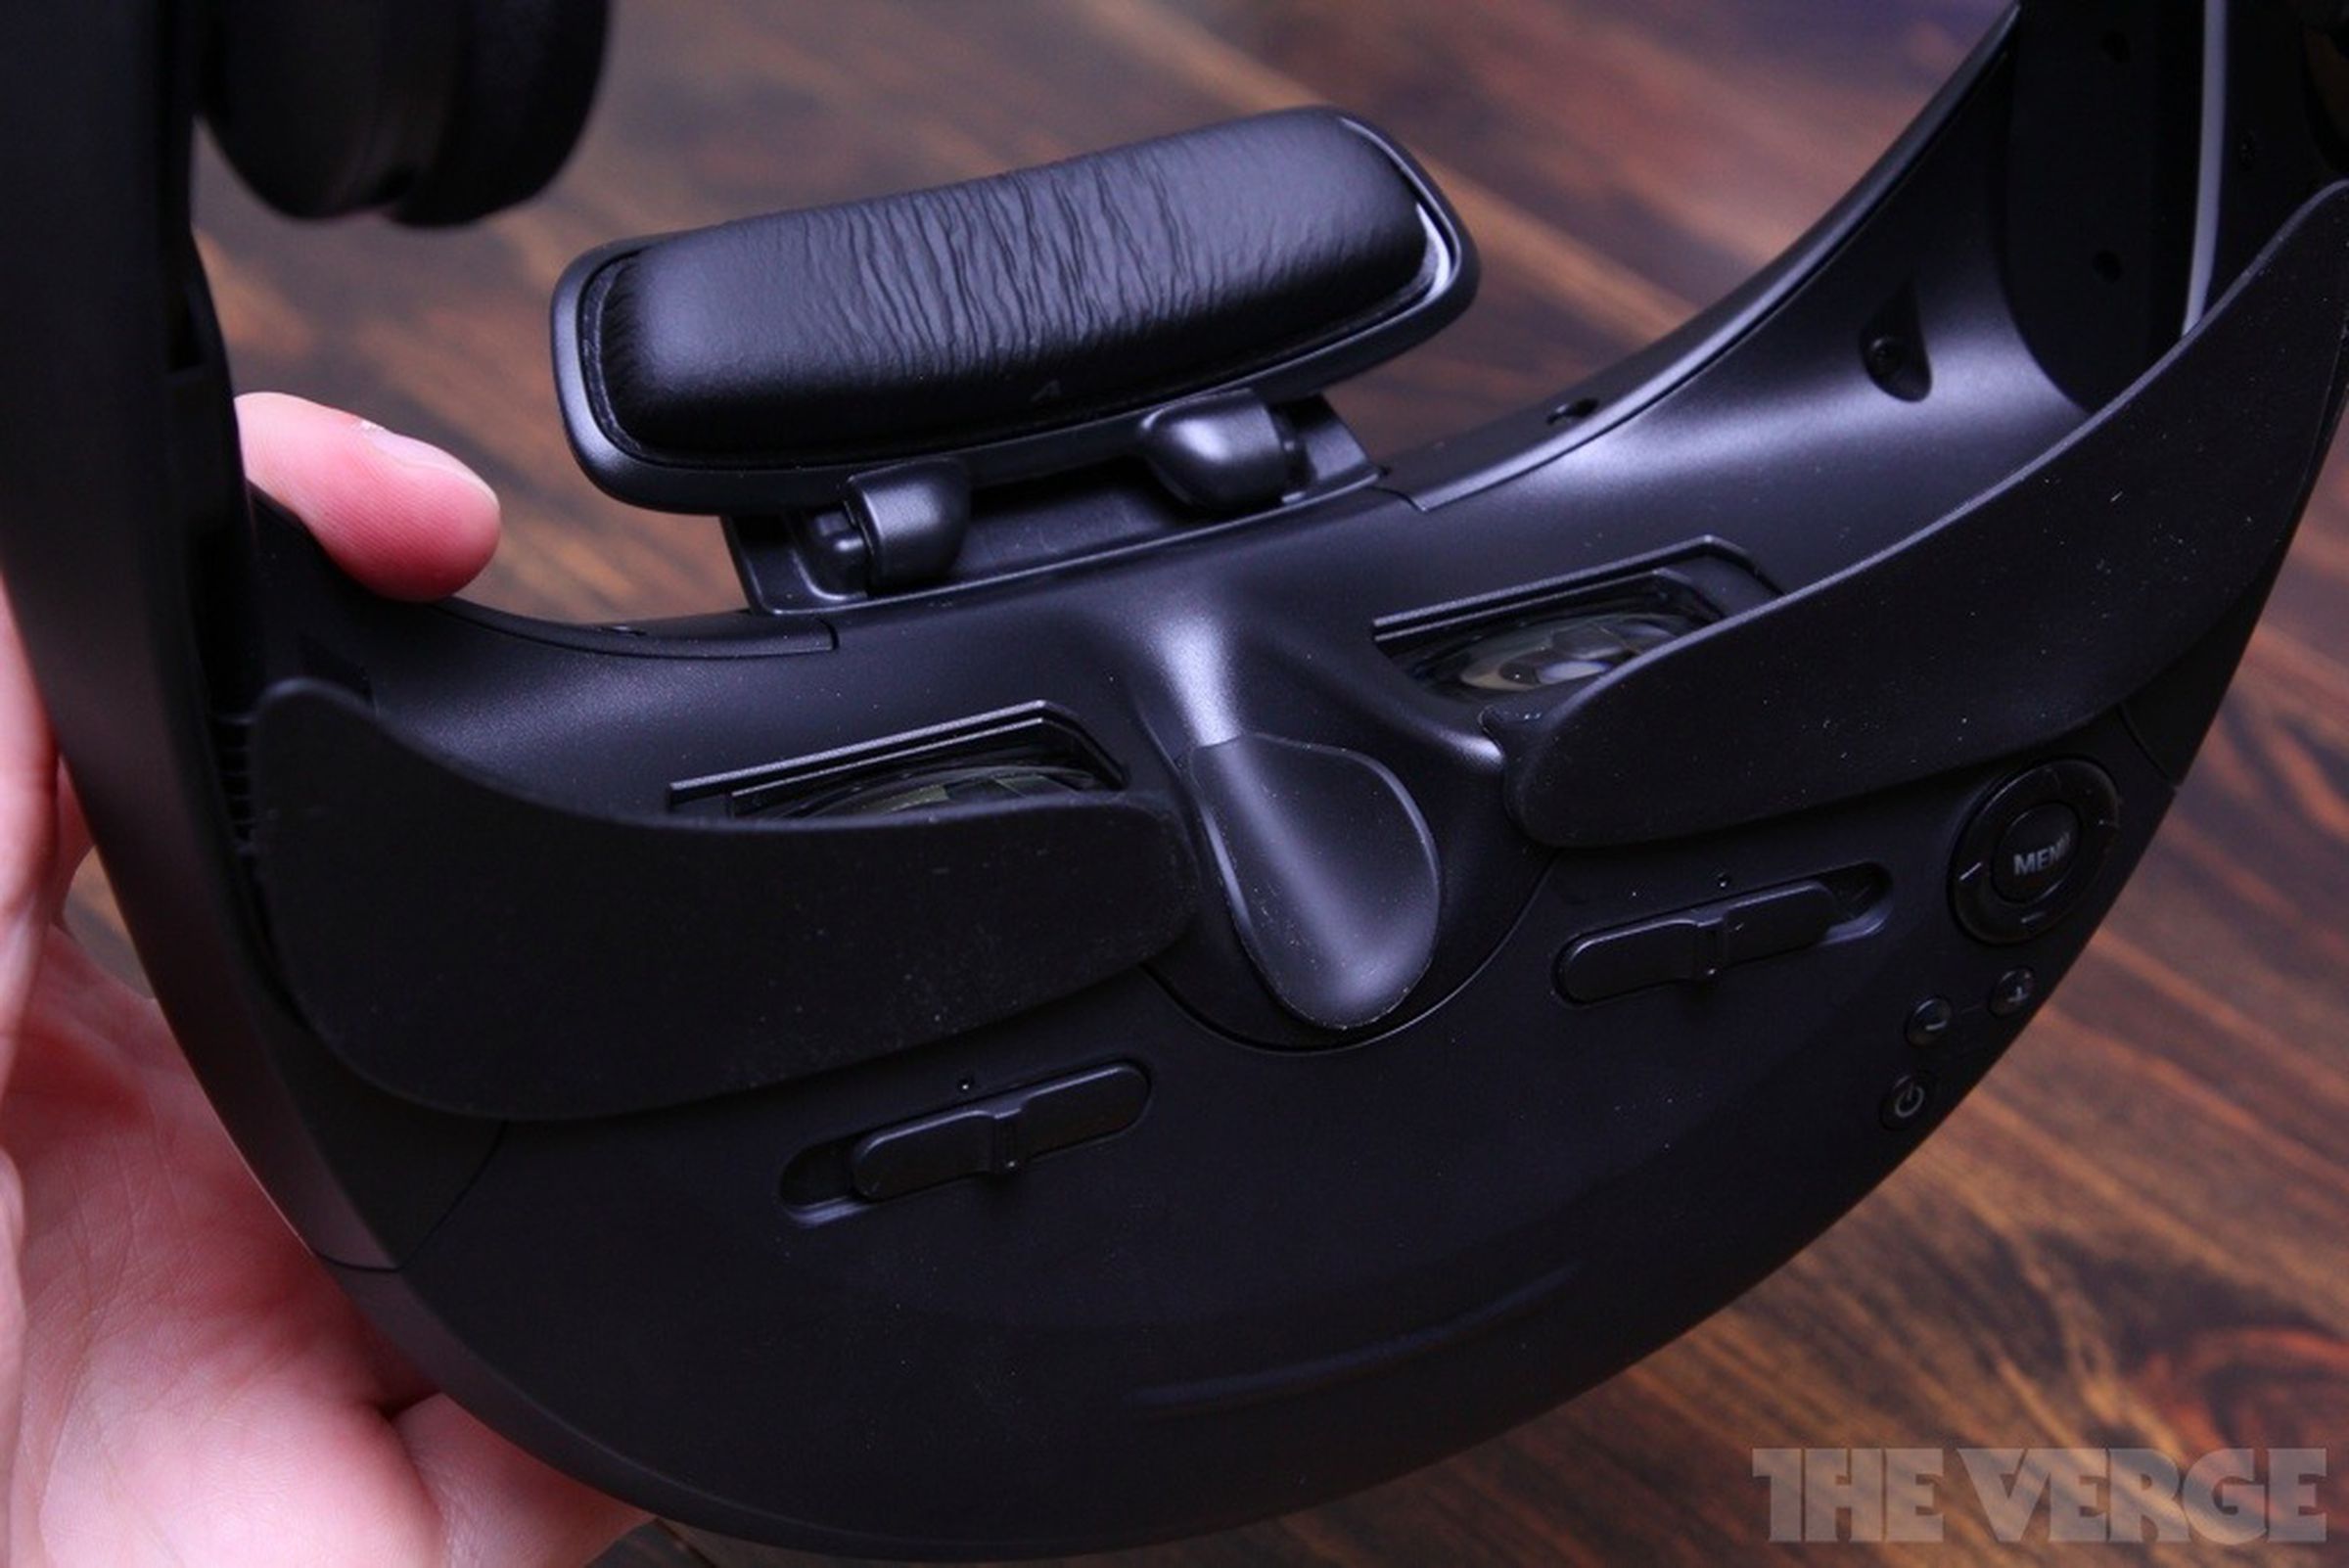 Sony HMZ-T1 Personal 3D Viewer review photos